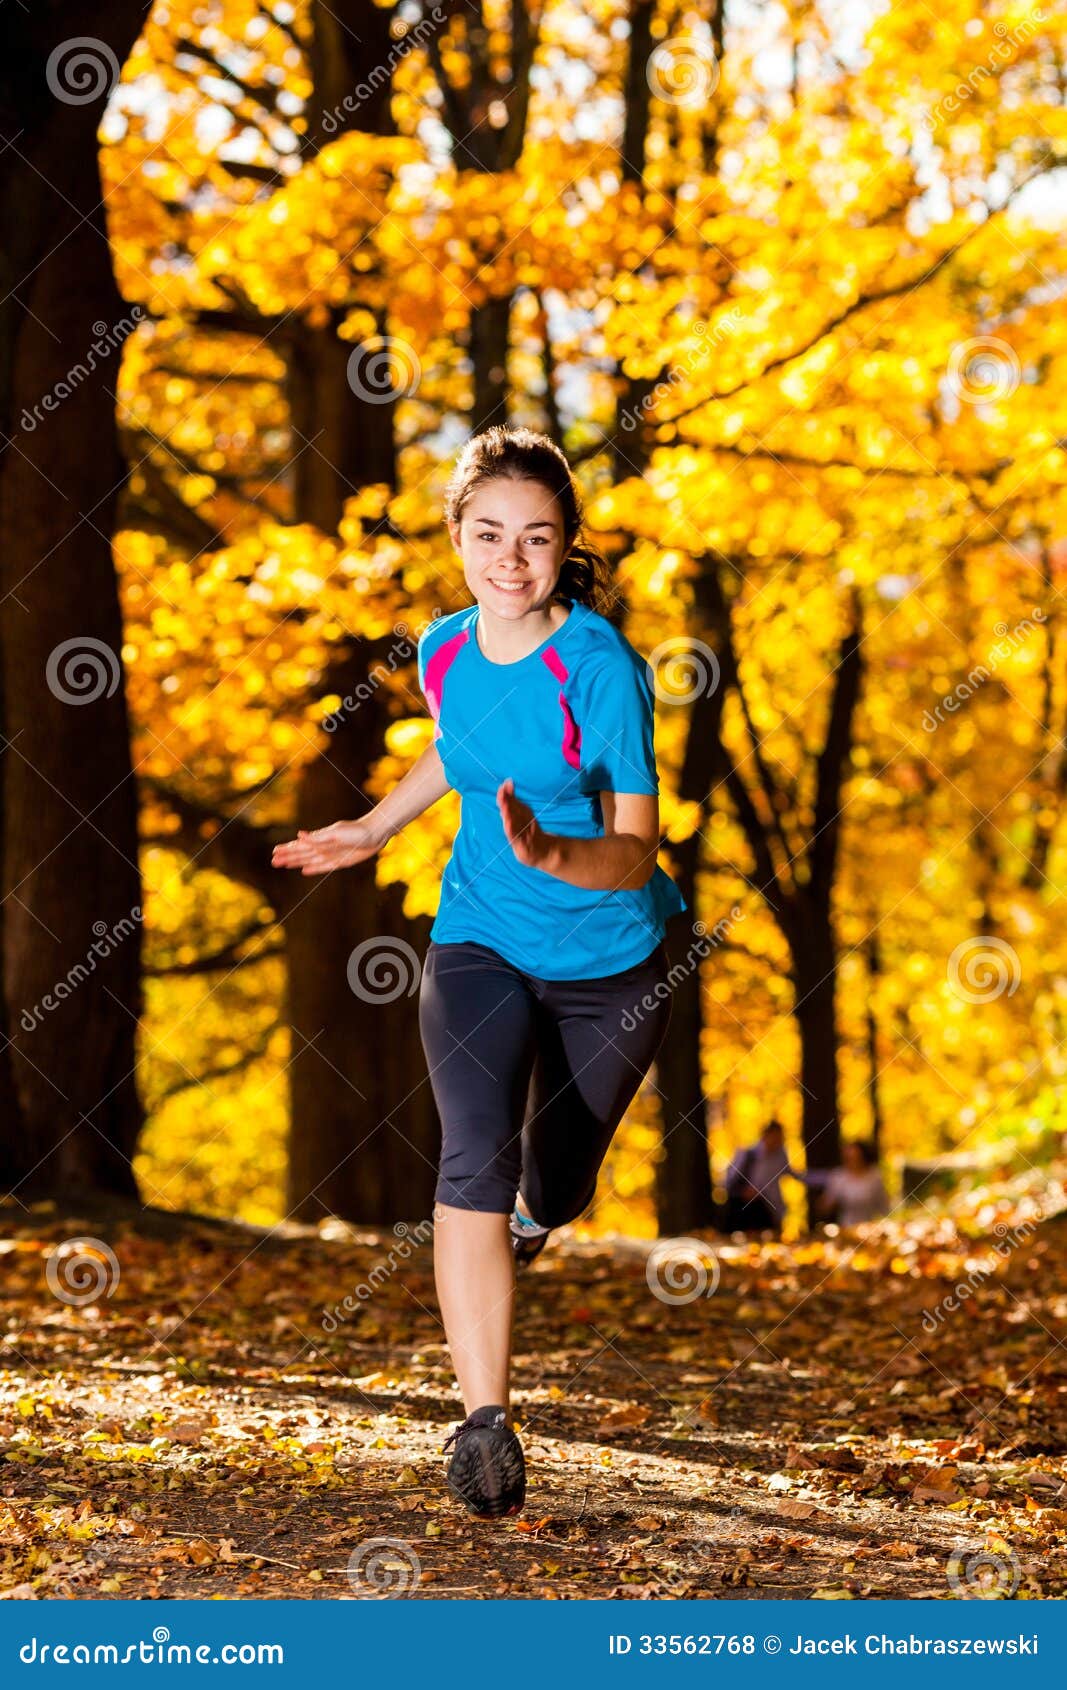 Girl running stock photo. Image of adolescent, person - 33562768